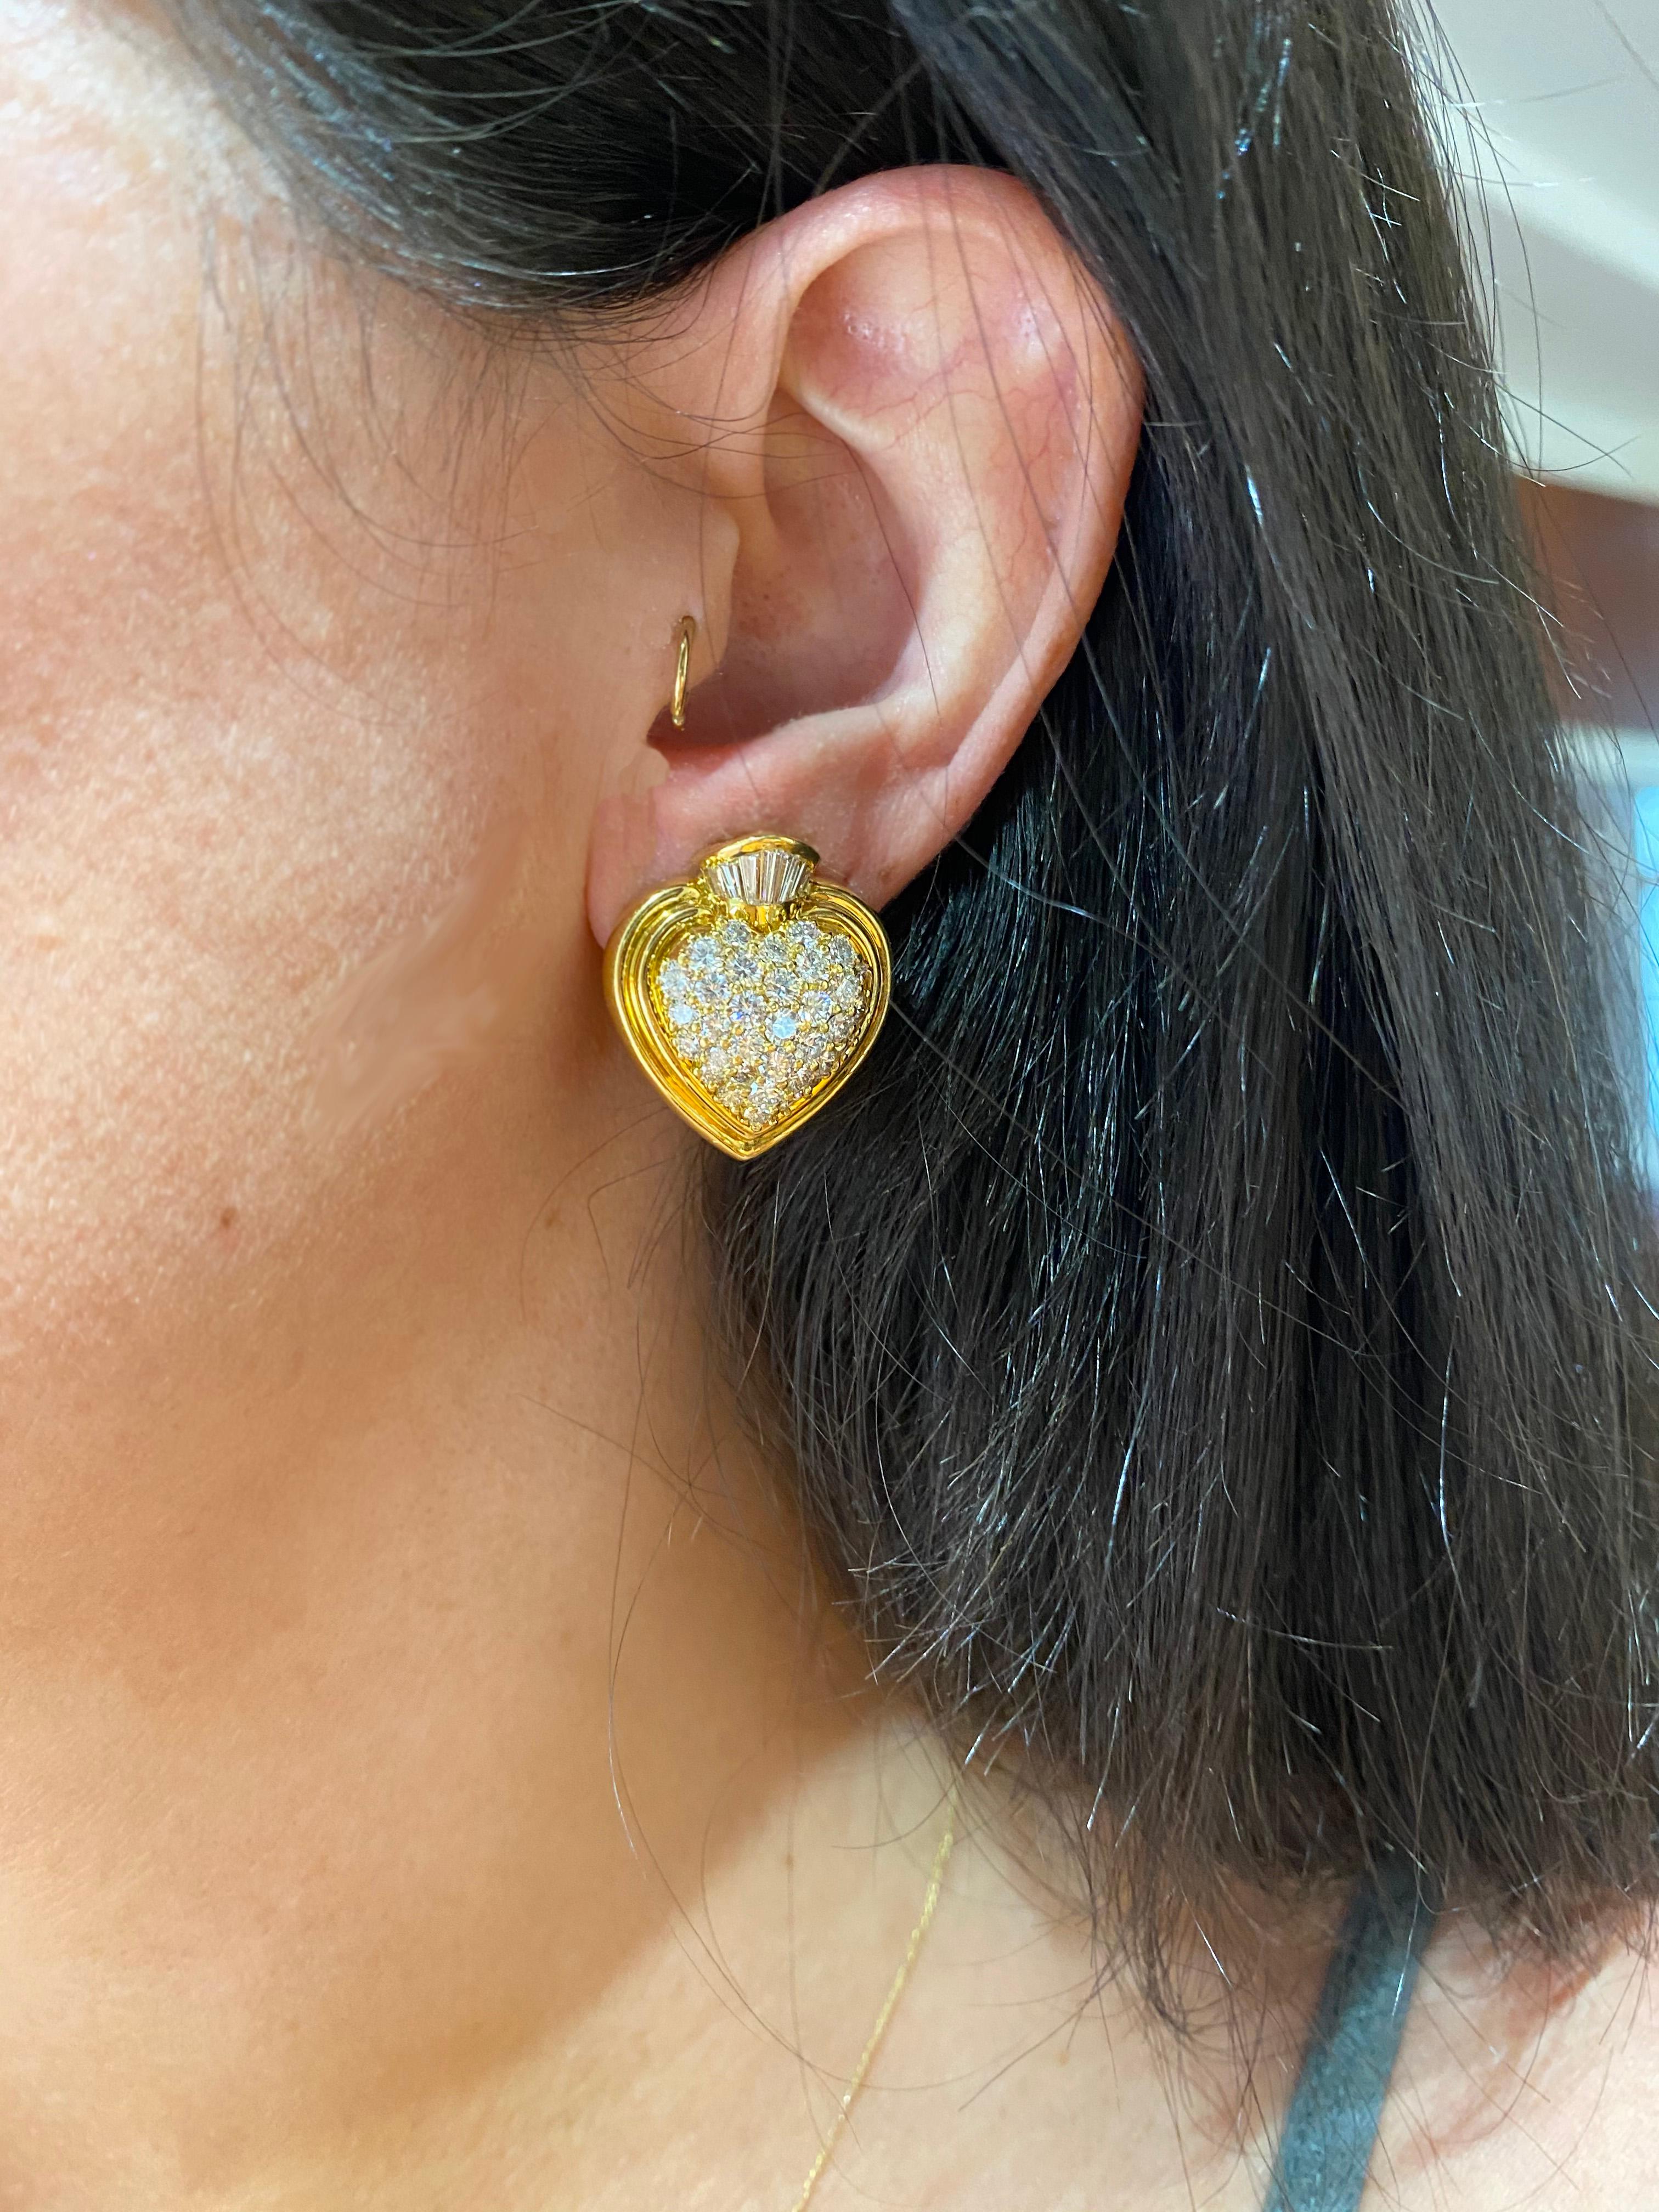 Statement earrings are not for the faint of heart. Pair with jeans and a tee or your favorite Sacred Heart D&G couture. Hammerman Brothers 18 karat yellow gold diamond heart earrings with pave round diamonds and a custom baguette diamond crown. 68